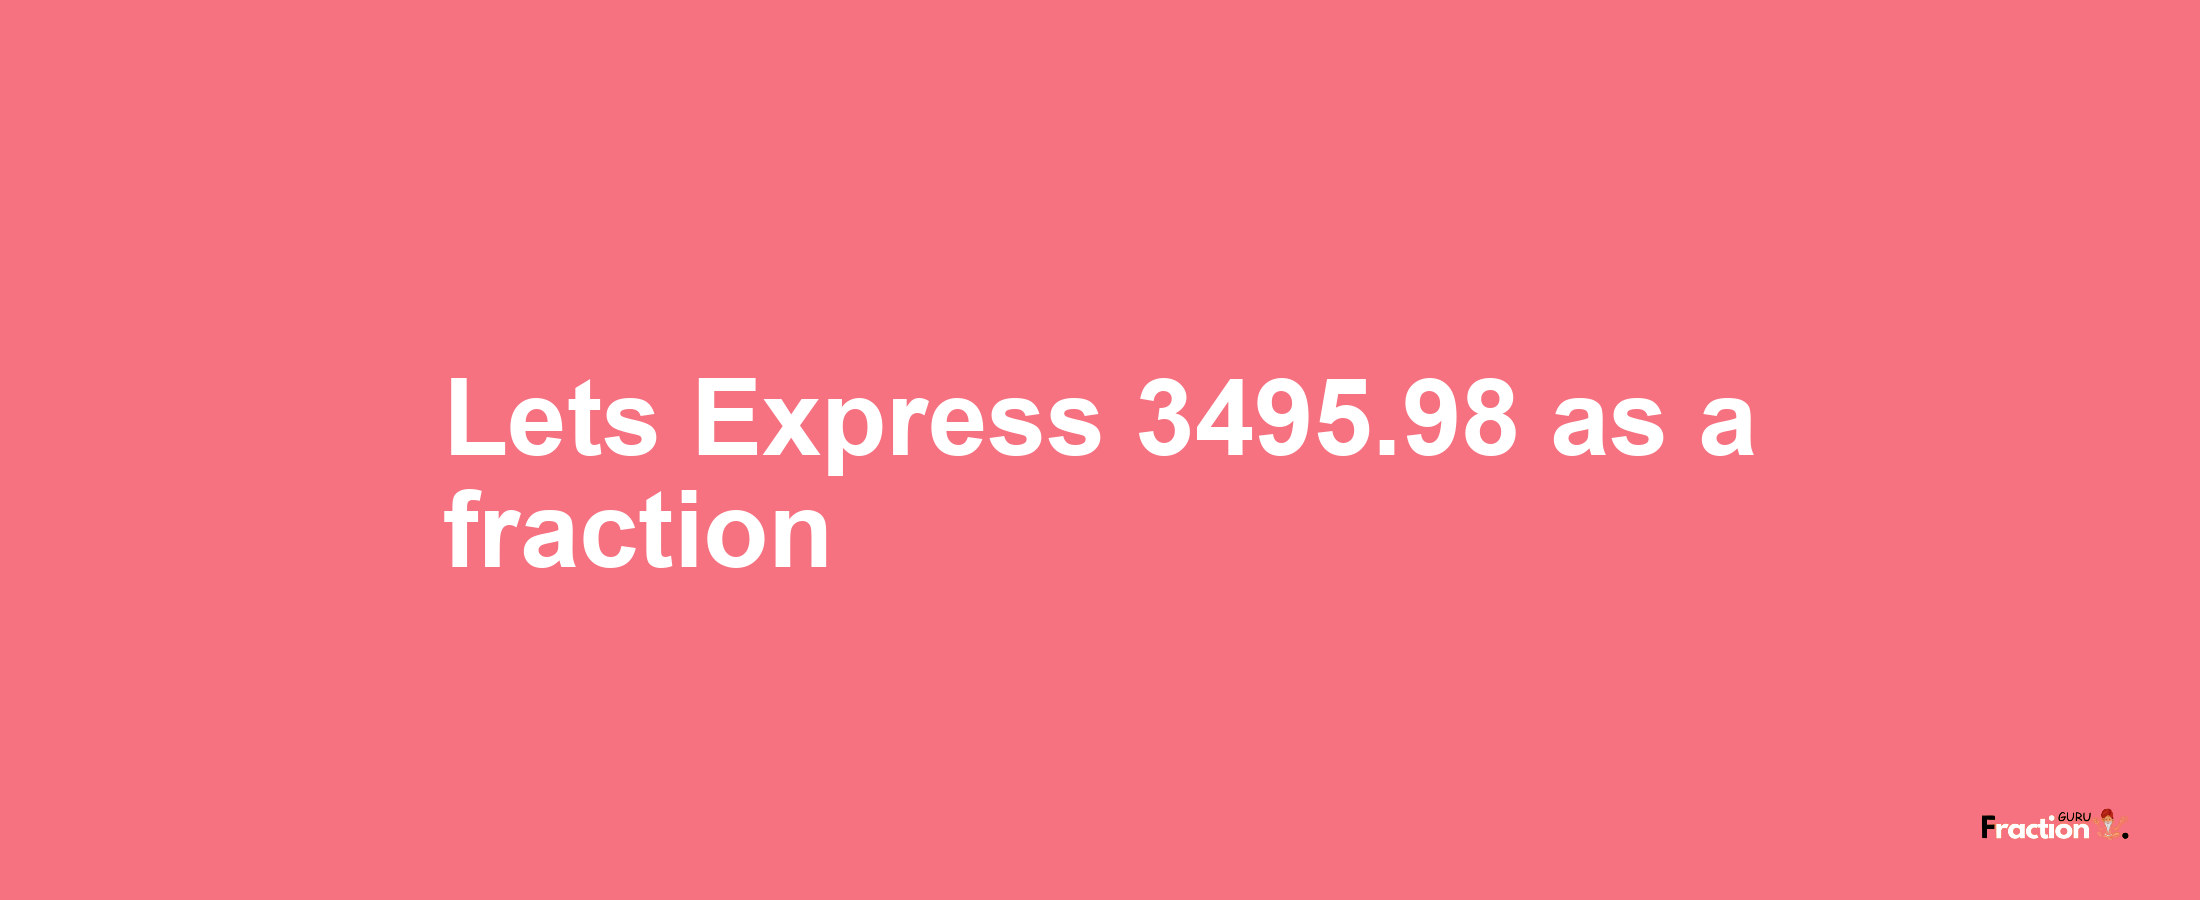 Lets Express 3495.98 as afraction